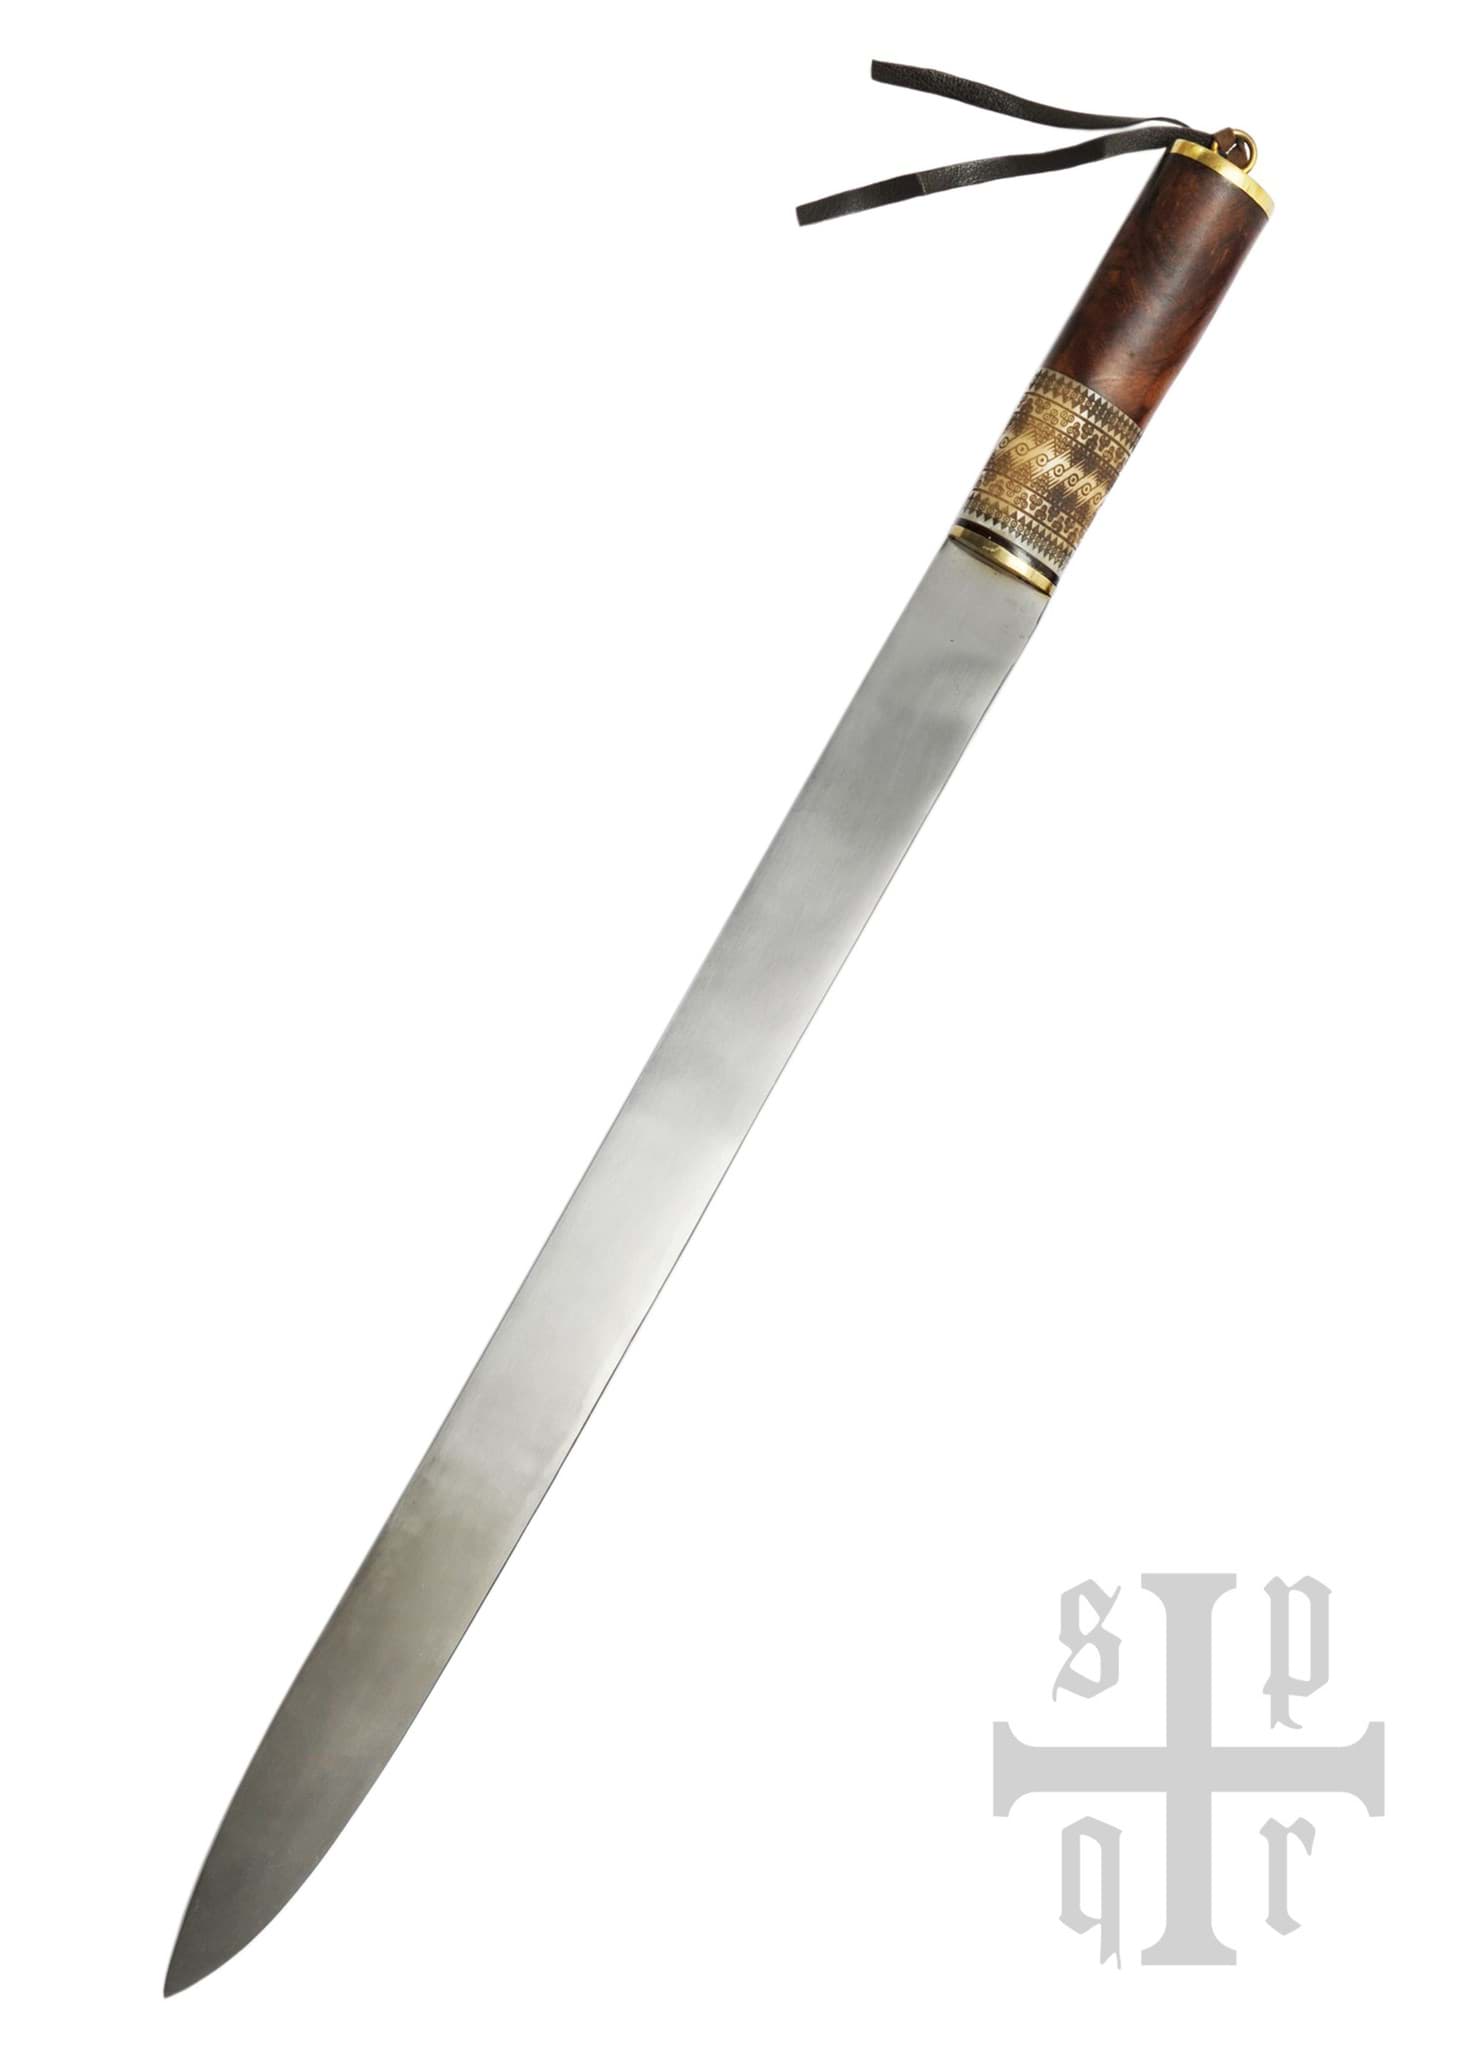 Picture of SPQR - Viking Long Seax from Birka Carbon Steel